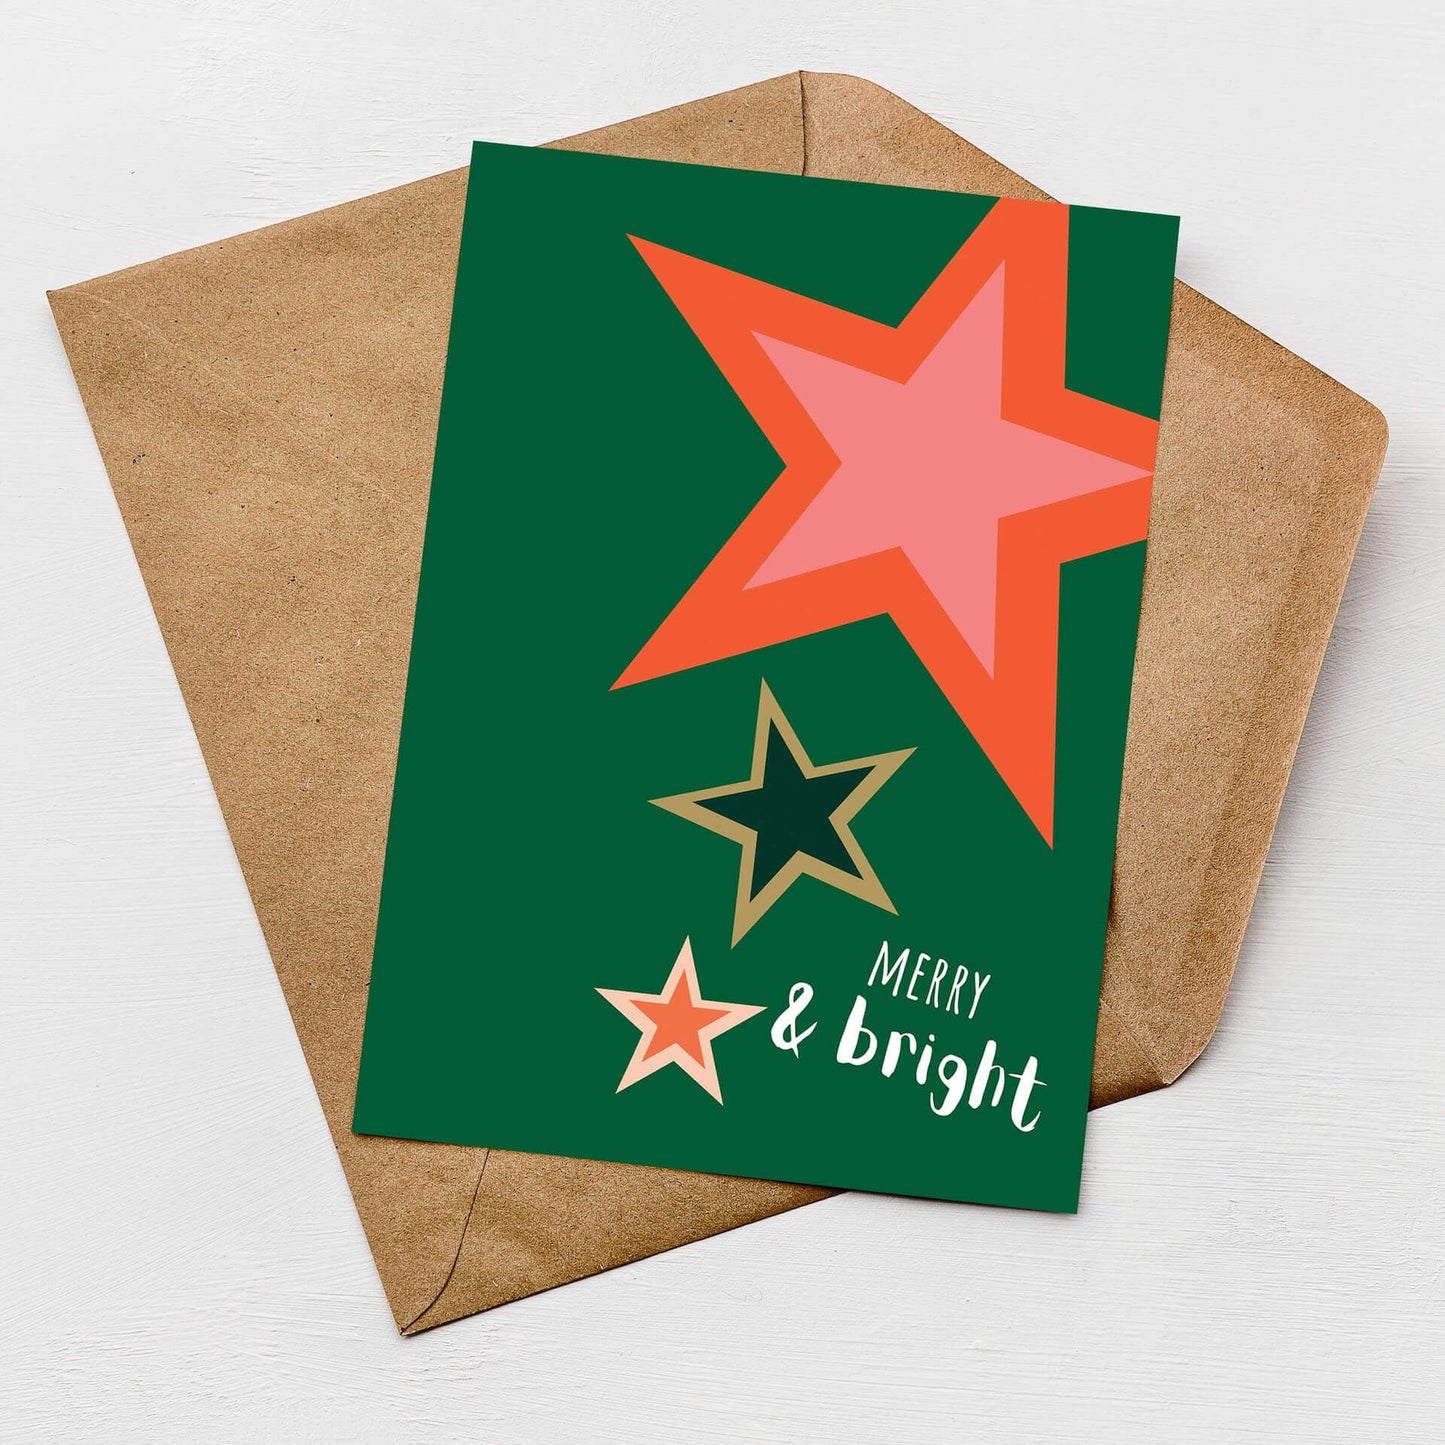 Greenwich Paper Studio Greetings Card Merry and Bright Christmas card